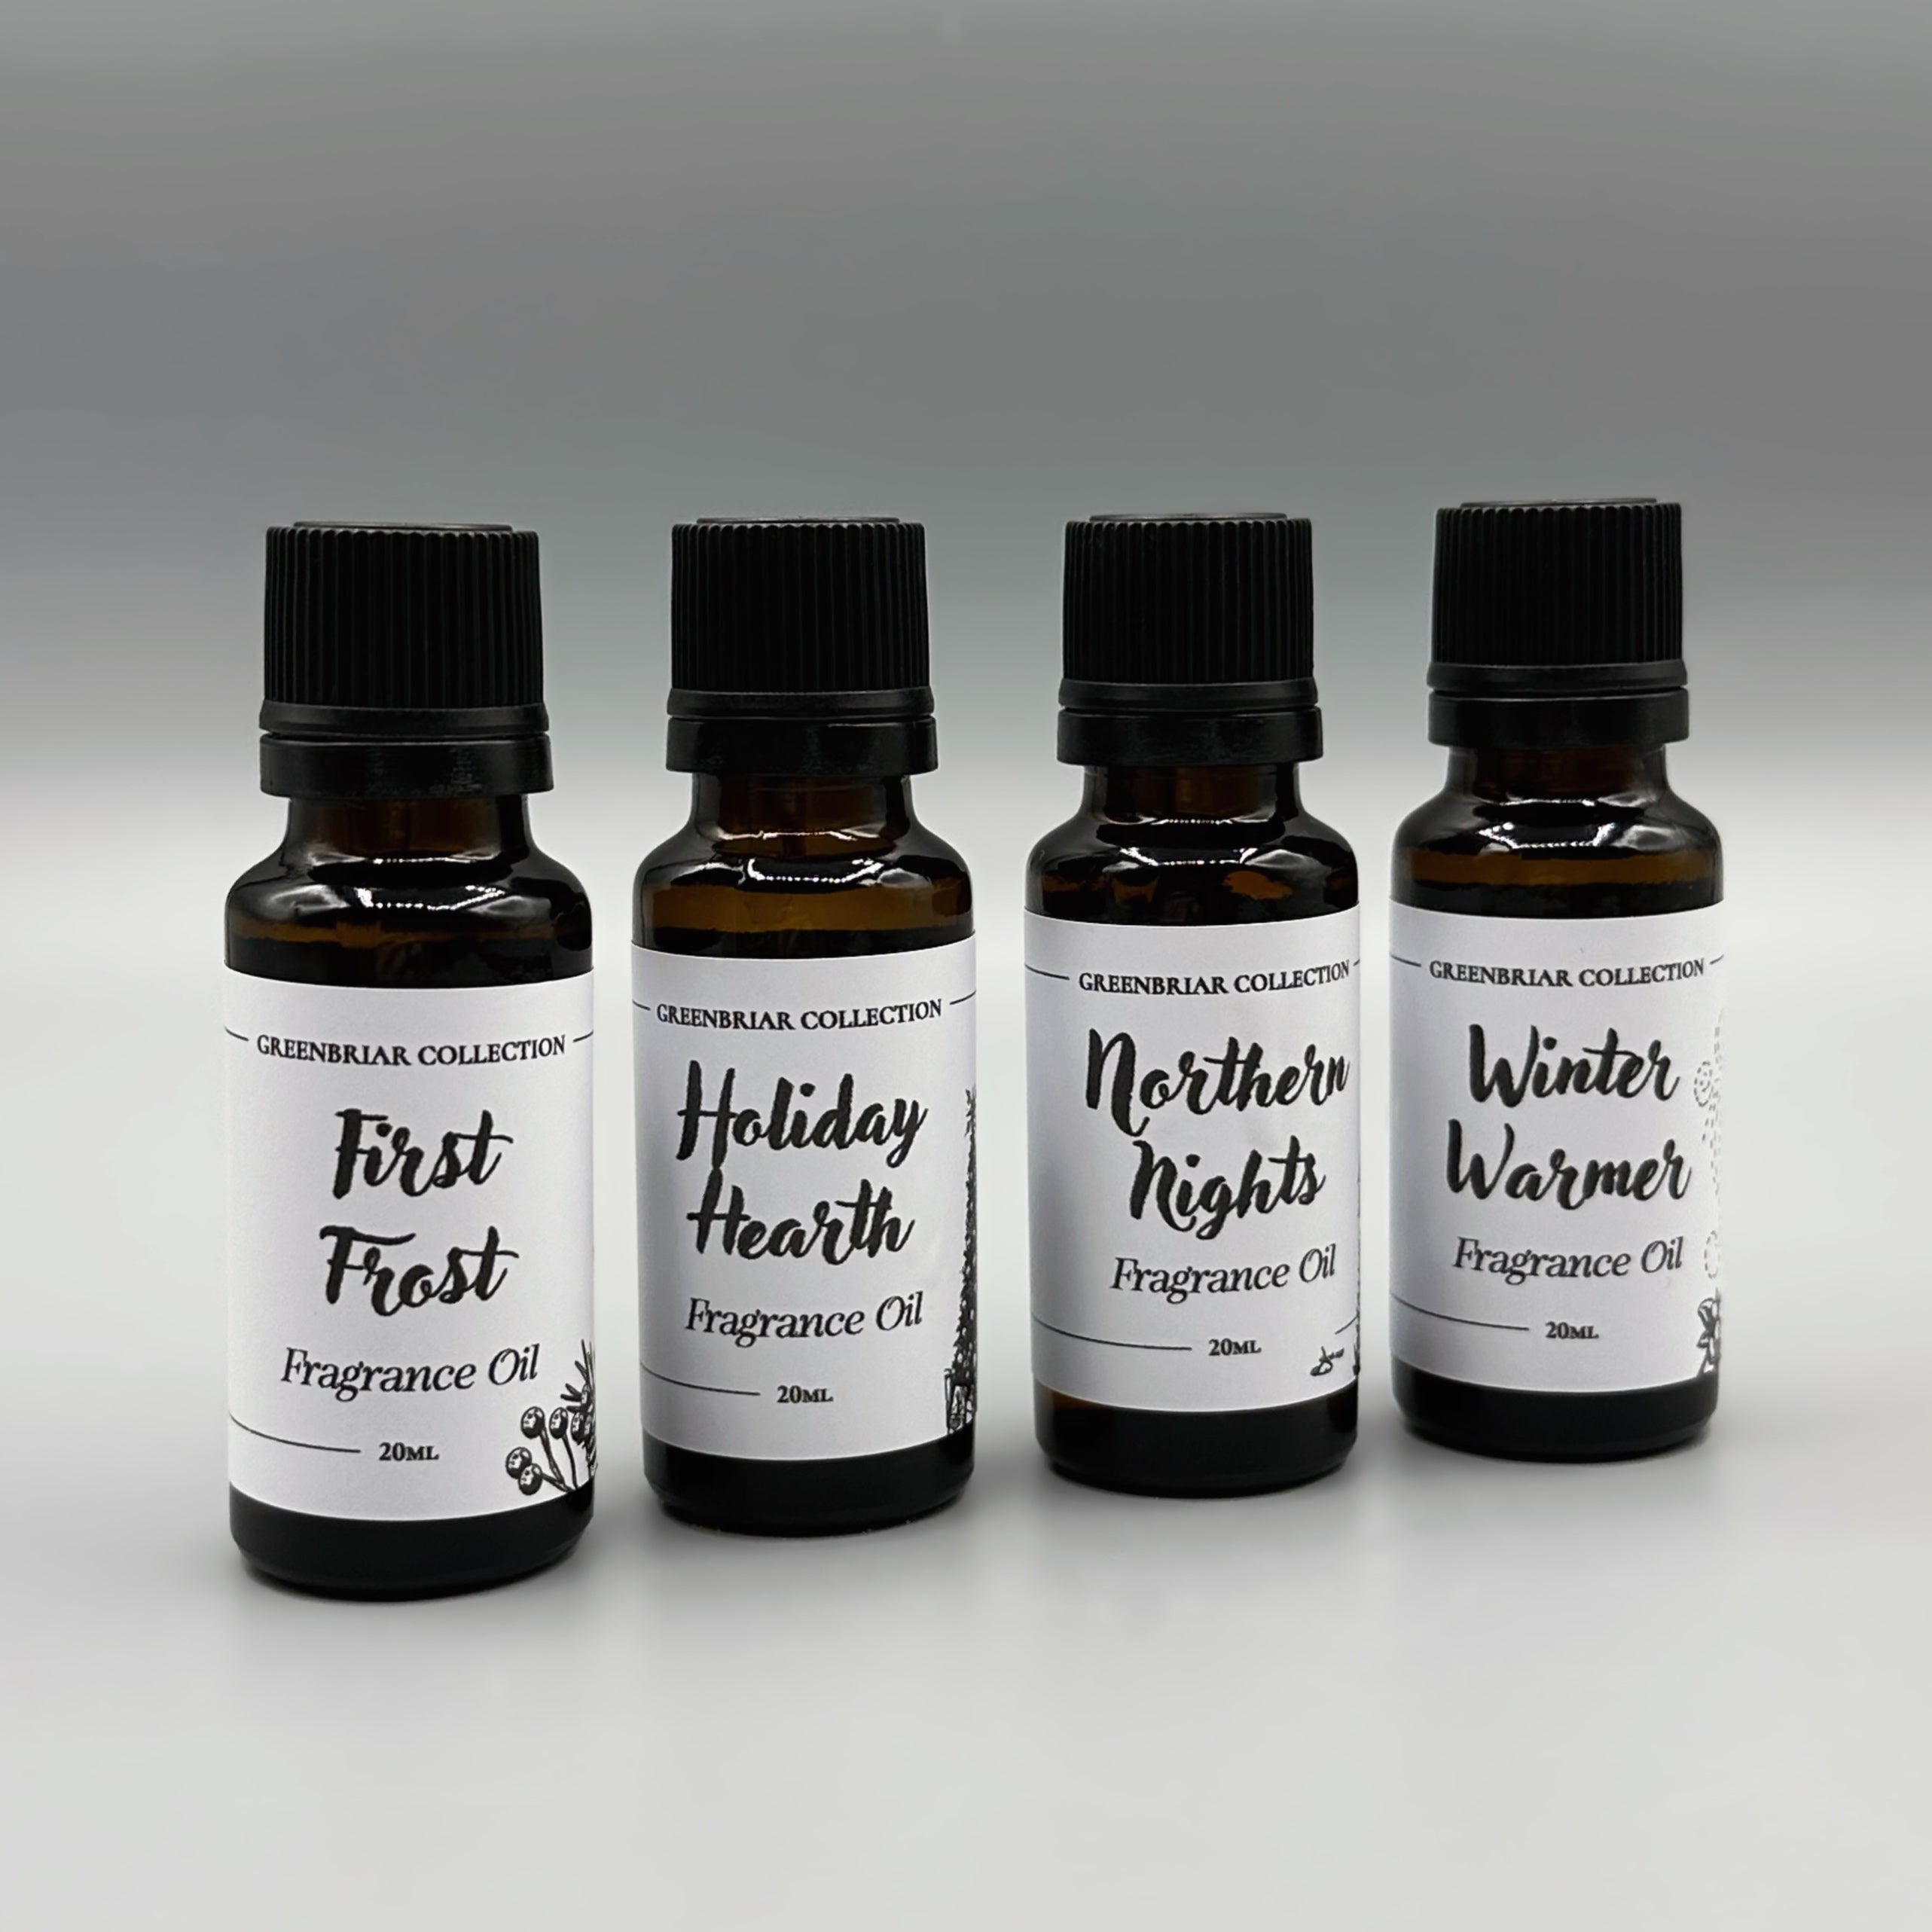 Signature Holiday Aromatic Oil Blends